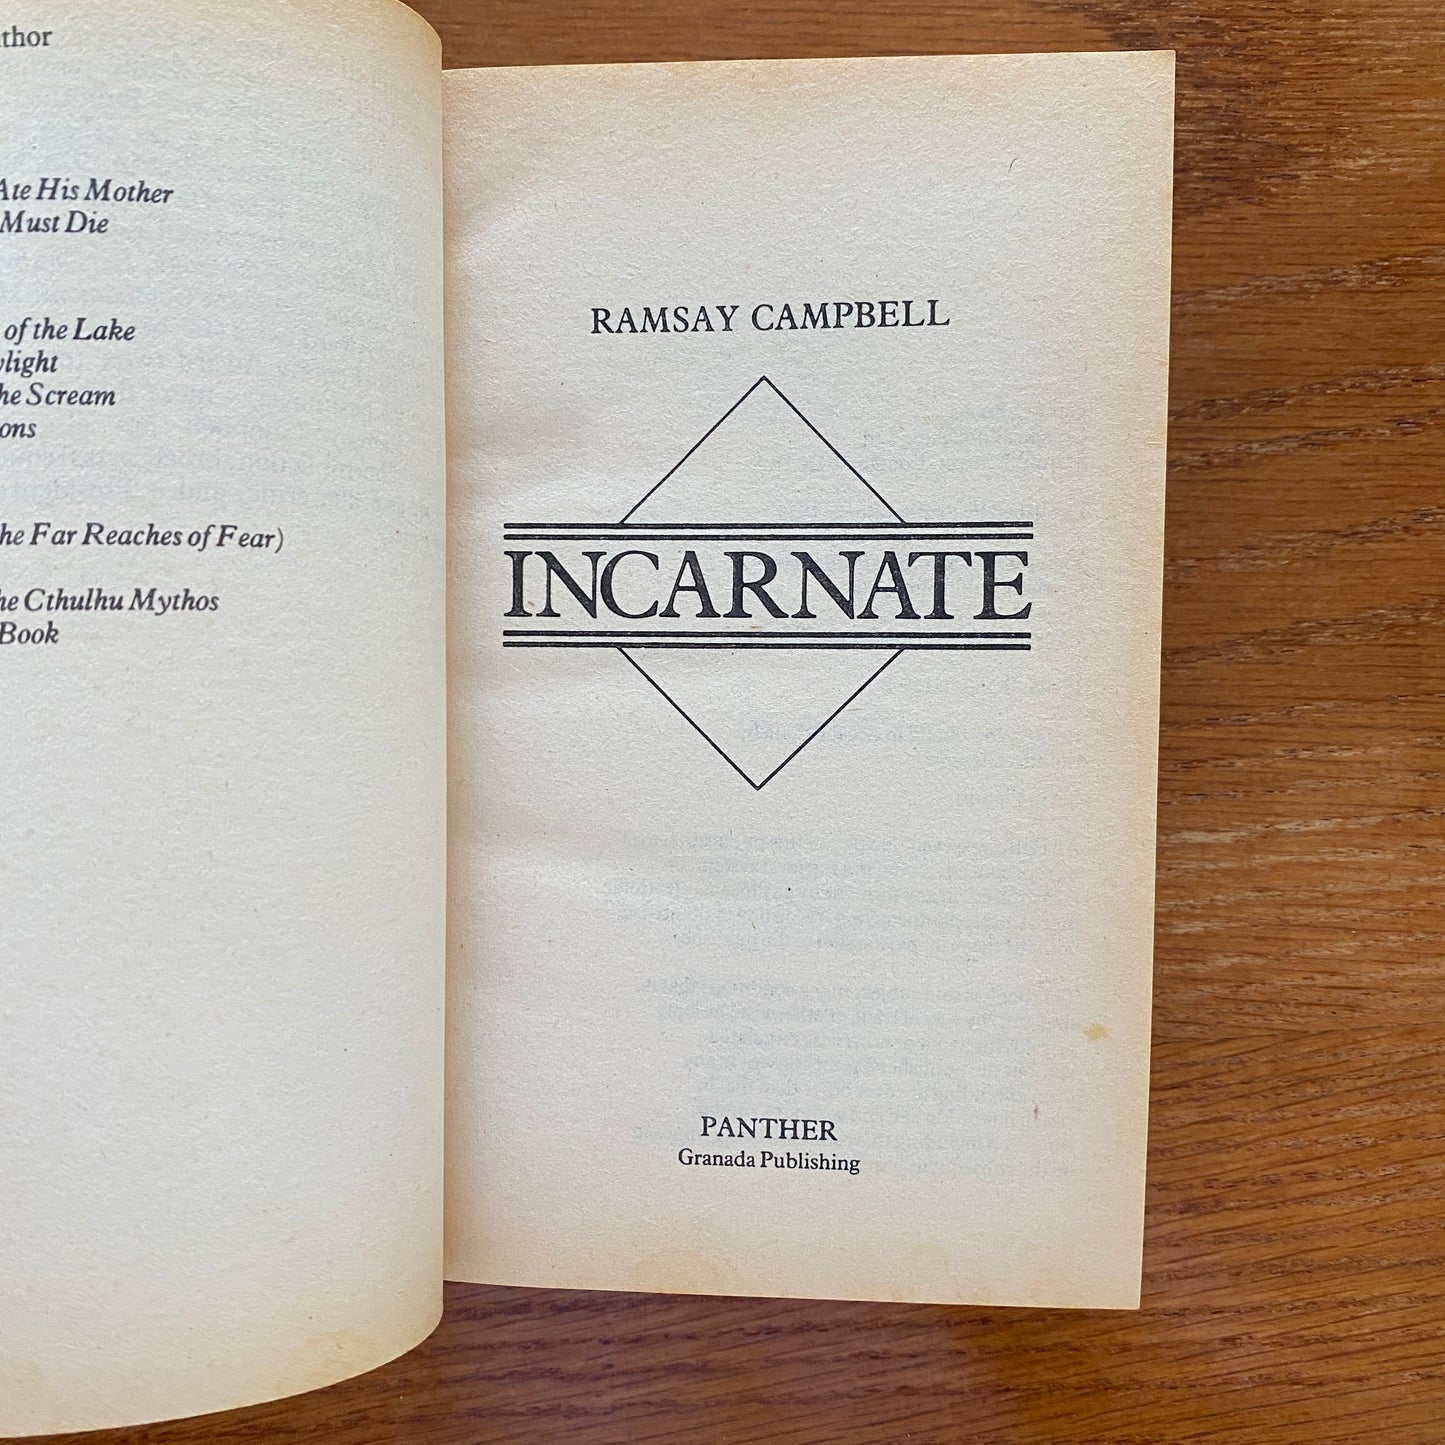 The Incarnate - Ramsey Campbell